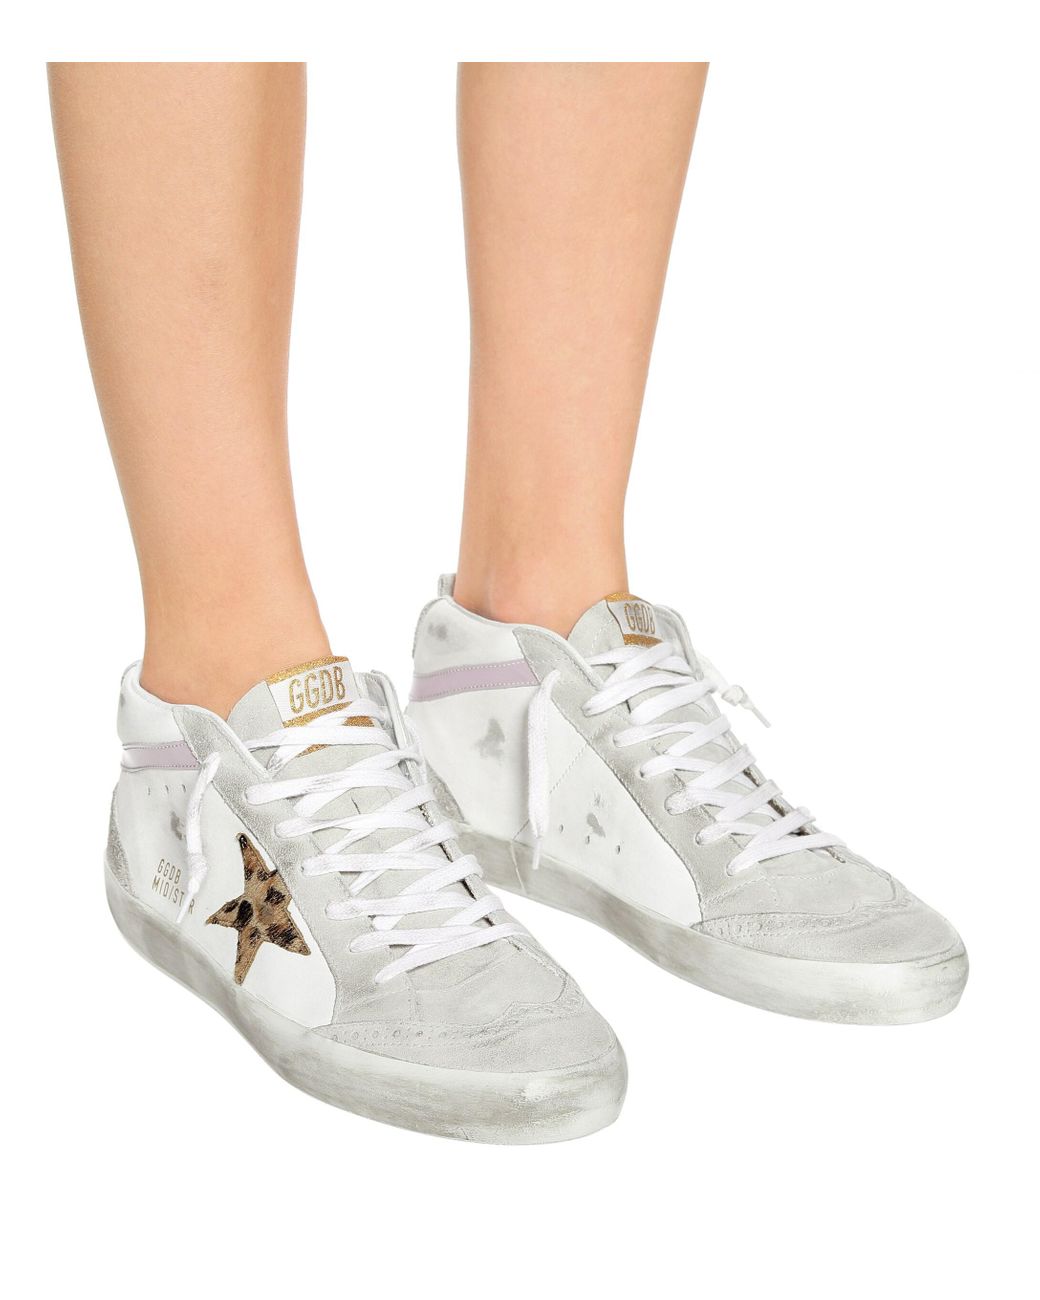 Golden Goose Mid Star Leather And Suede Sneakers in White - Lyst